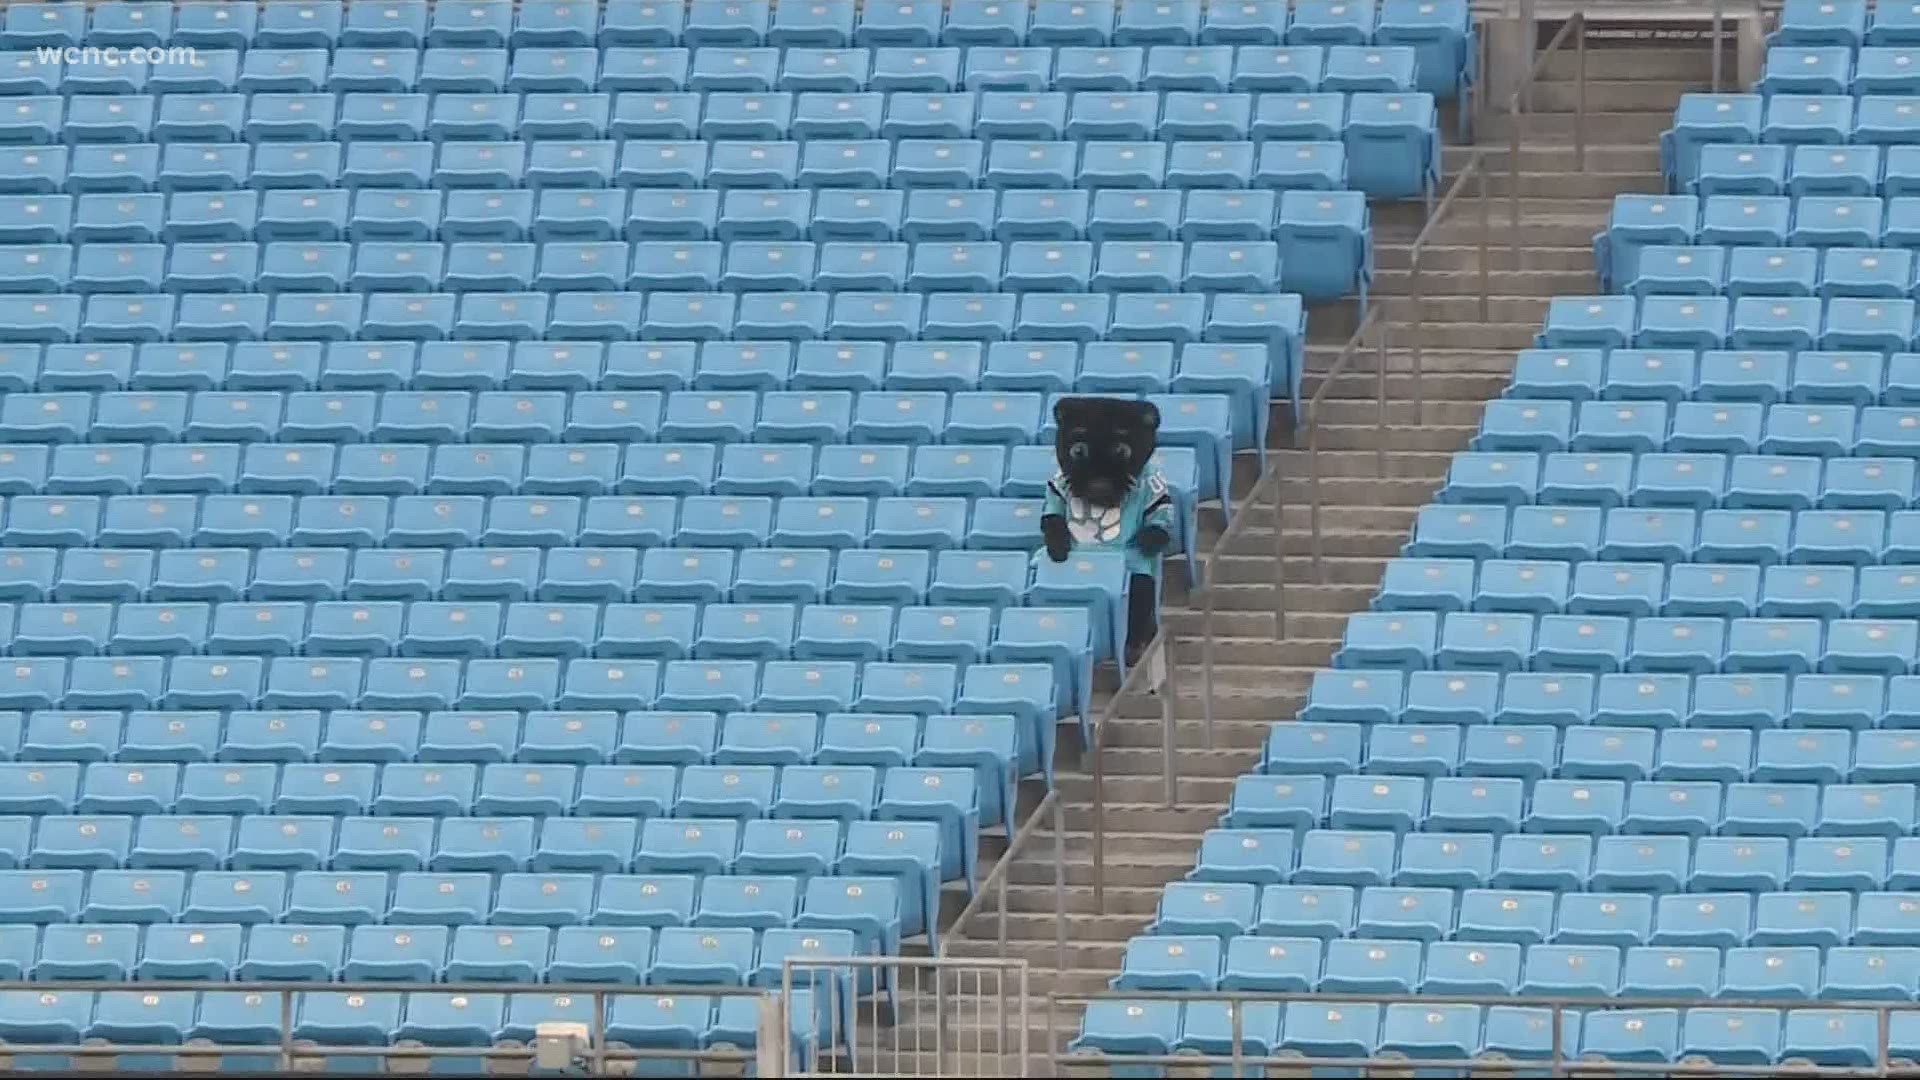 With no fans in the stands, the Panthers used artificial sound to make the event feel more like it would before COVID-19.